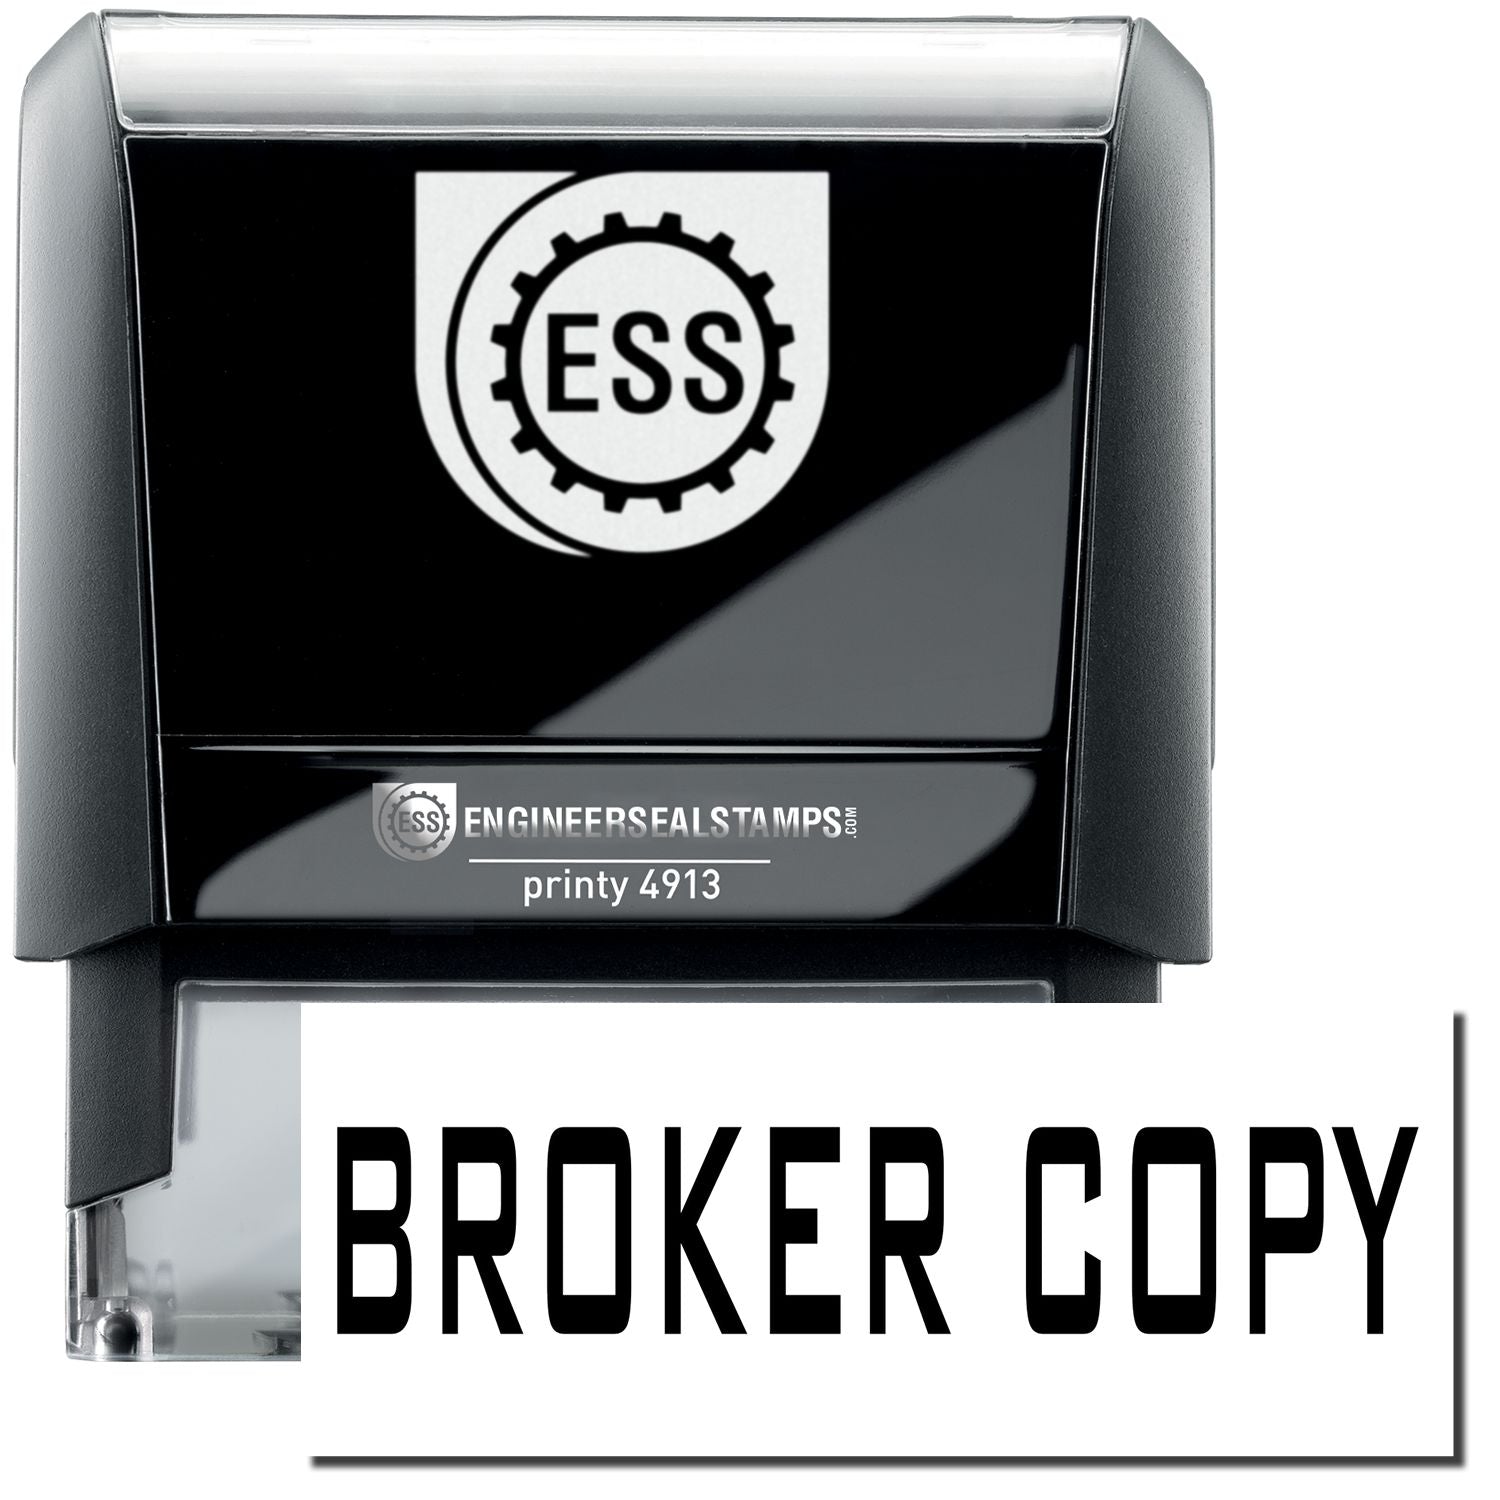 A self-inking stamp with a stamped image showing how the text "BROKER COPY" in a large bold font is displayed by it.